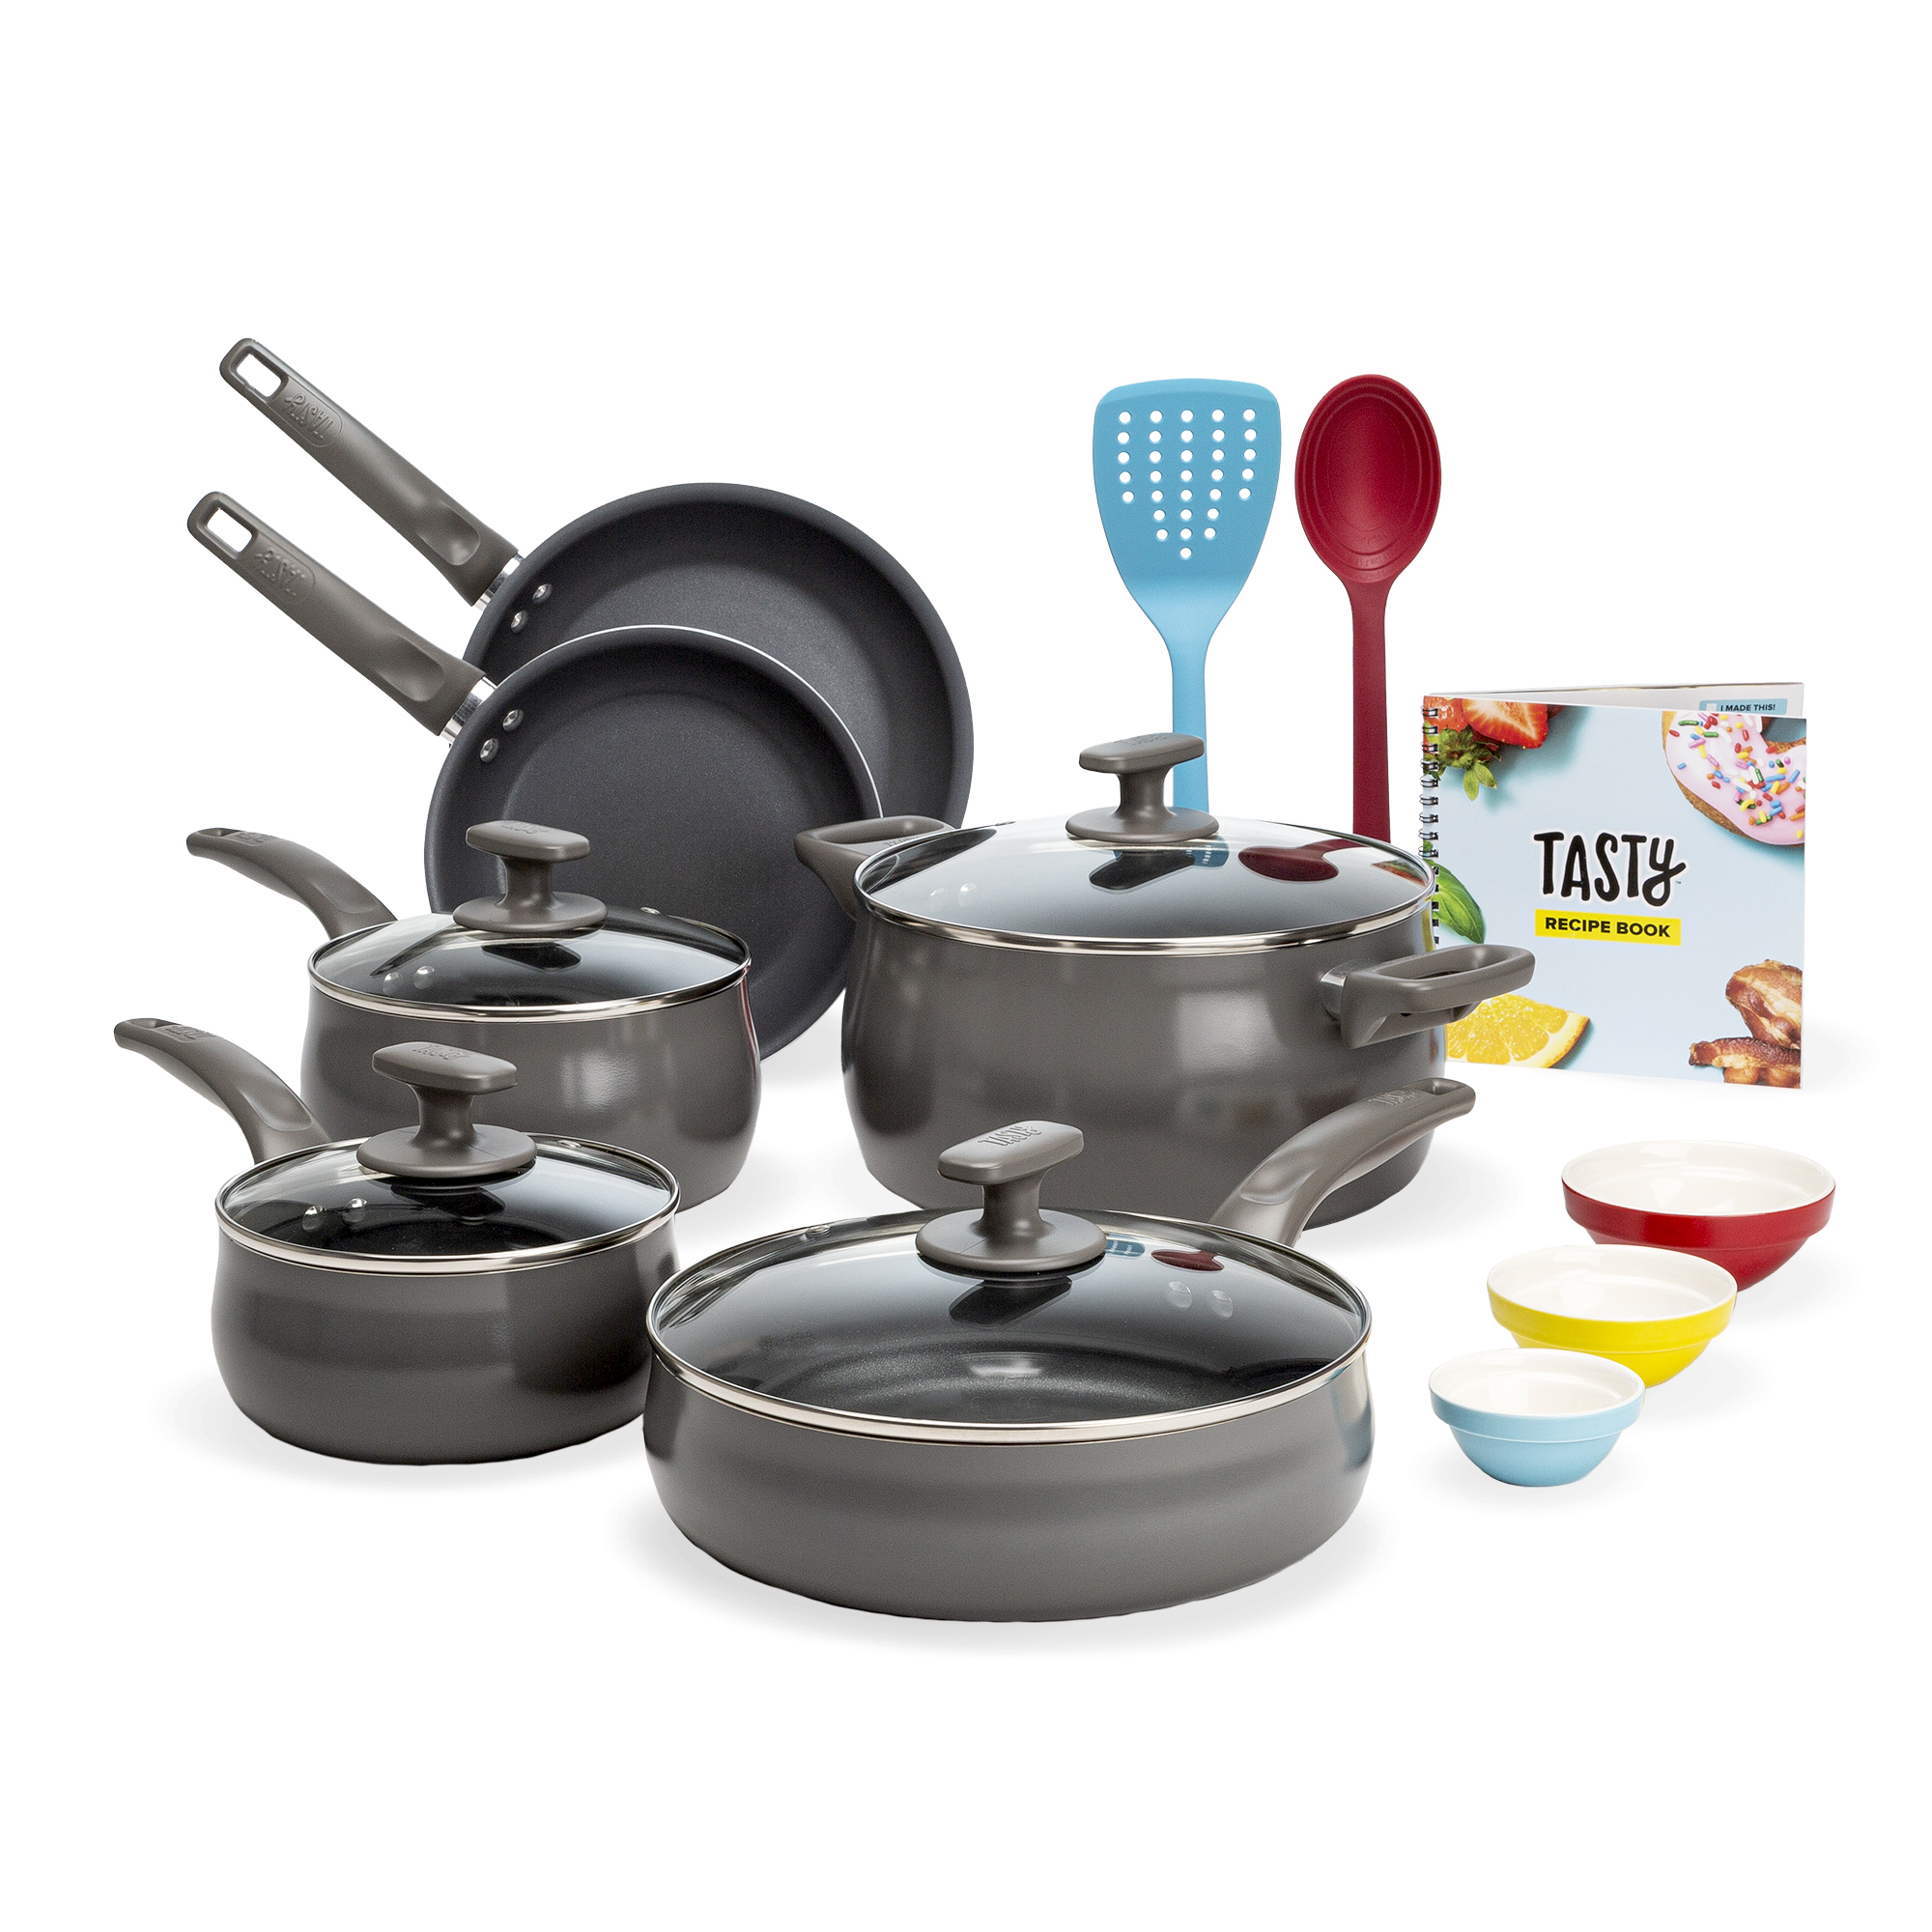 Tasty Non-Stick 16-Piece Cookware Set, Diamond-Reinforced, Ombre Gray - image 1 of 11